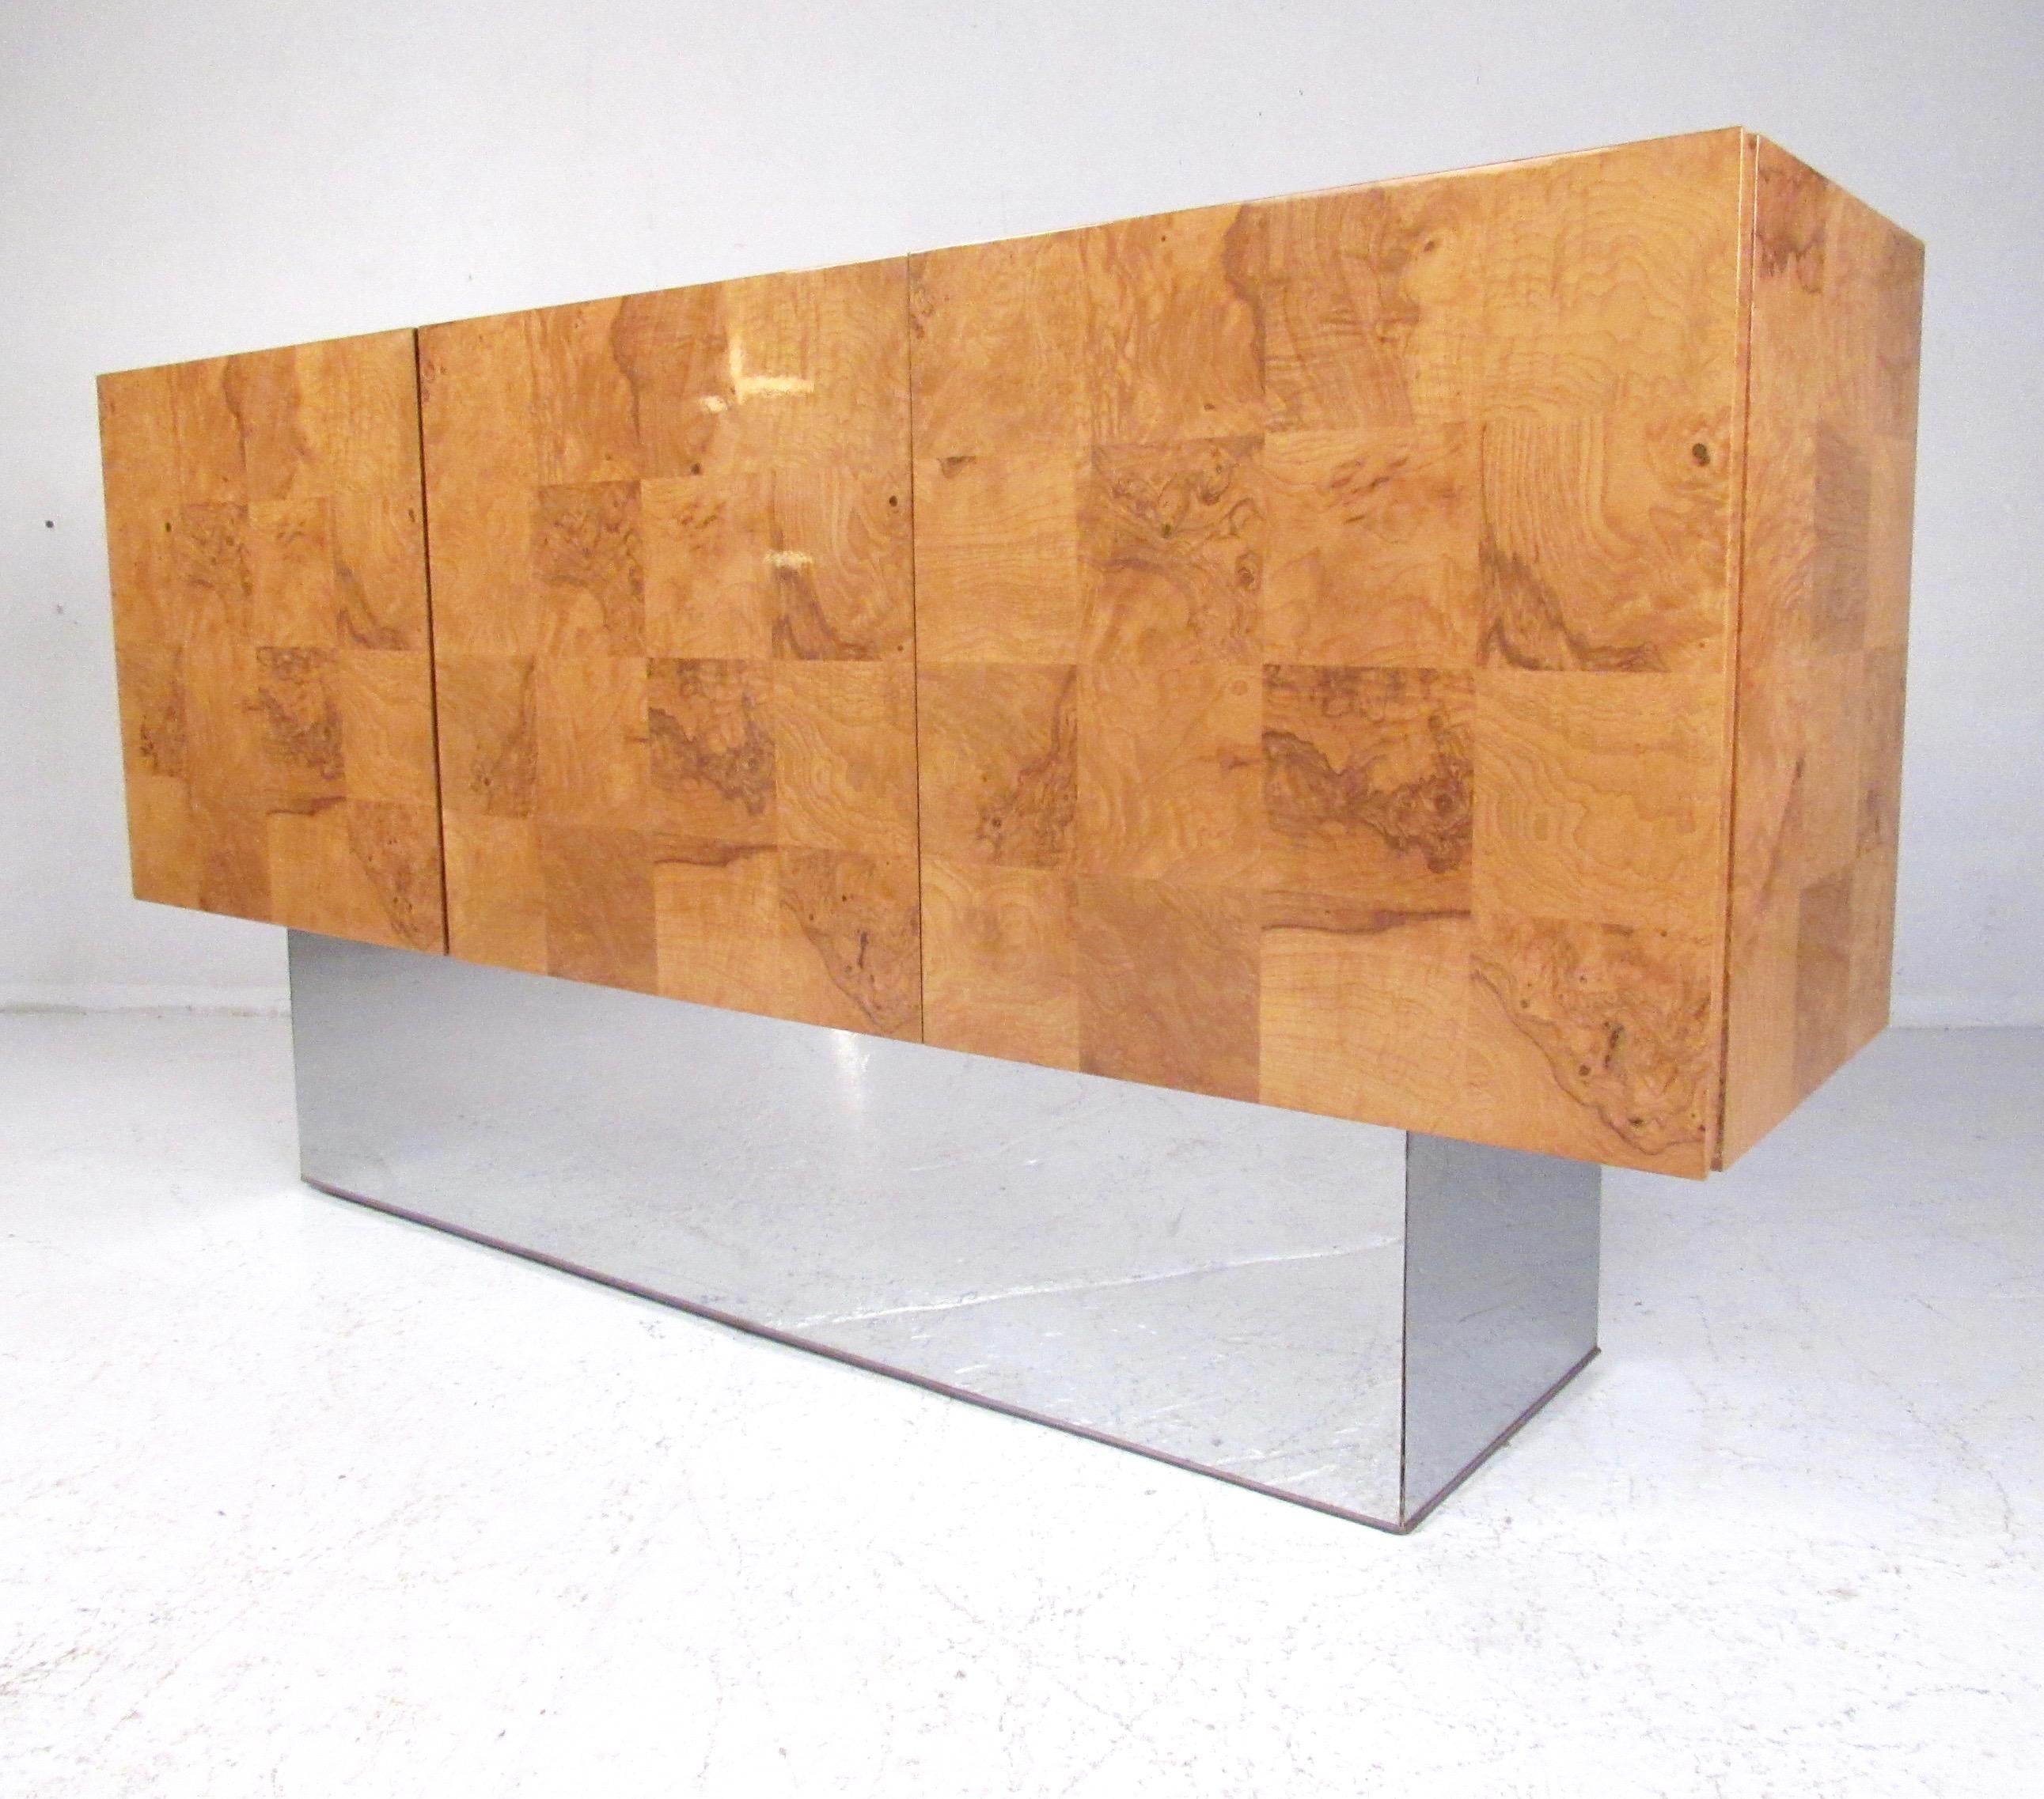 Impressive Mid-Century Modern sideboard by Milo Baughman features exquisite golden bird's eye burl wood with stylish metal  base. The spacious shelved interior also features drawer storage for silverware. Original manufacturers label intact, perfect